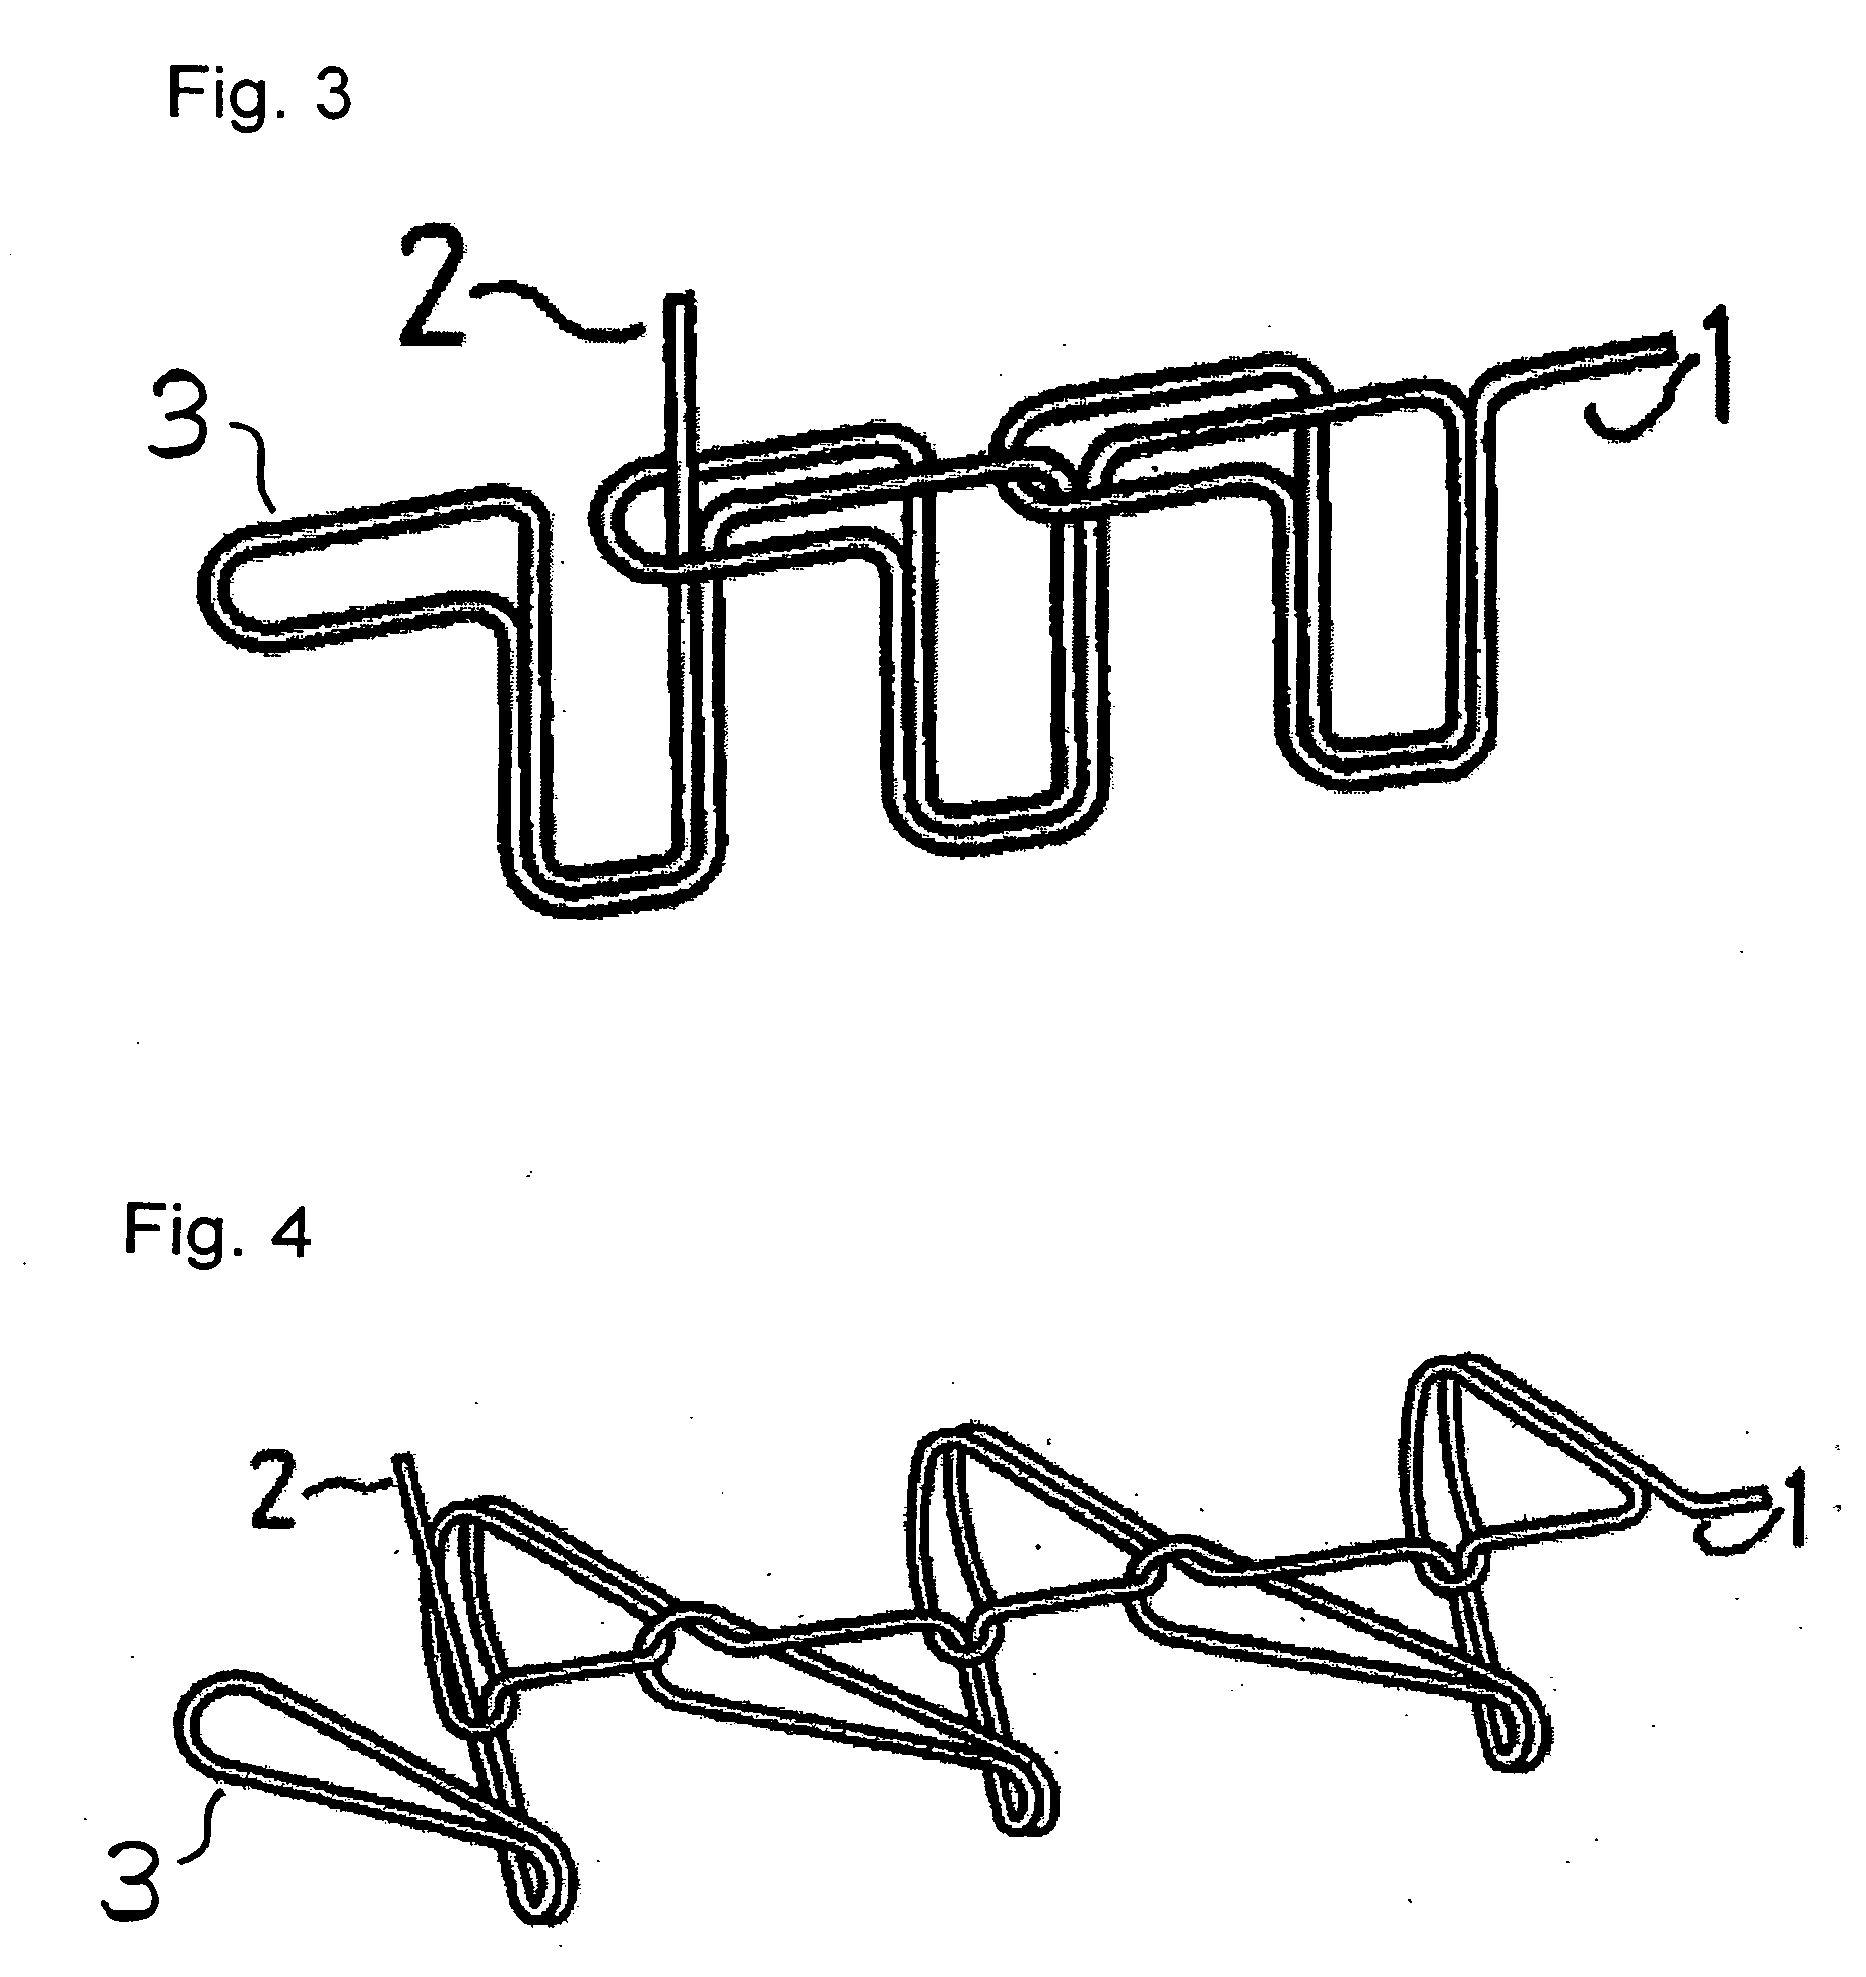 Suture reinforcement material for automatic suturing device